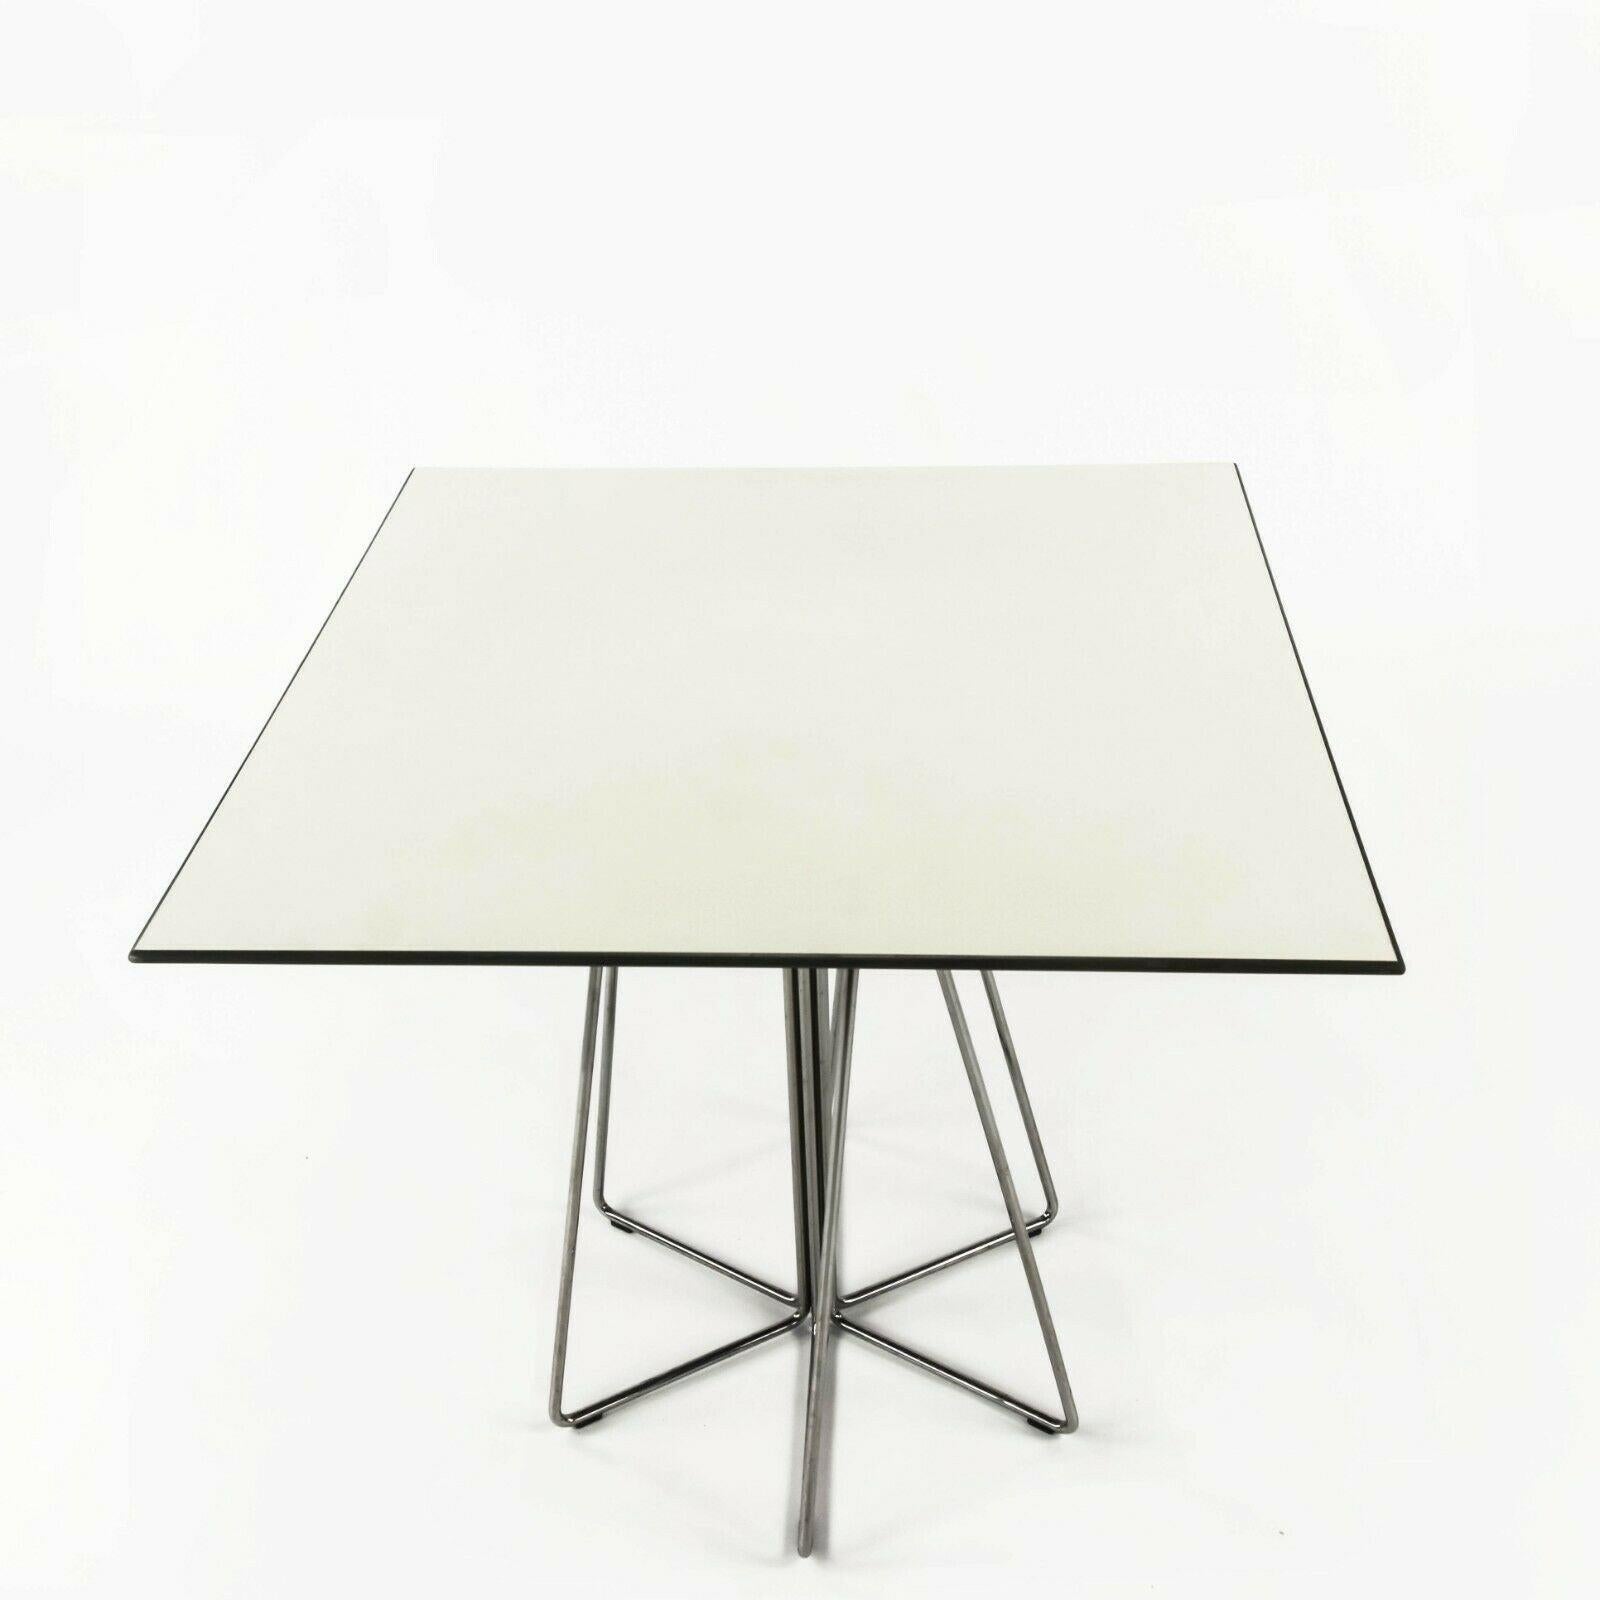 1990s Knoll Paperclip Dining Table by Lella and Massimo Vignelli w/ Laminate Top For Sale 1